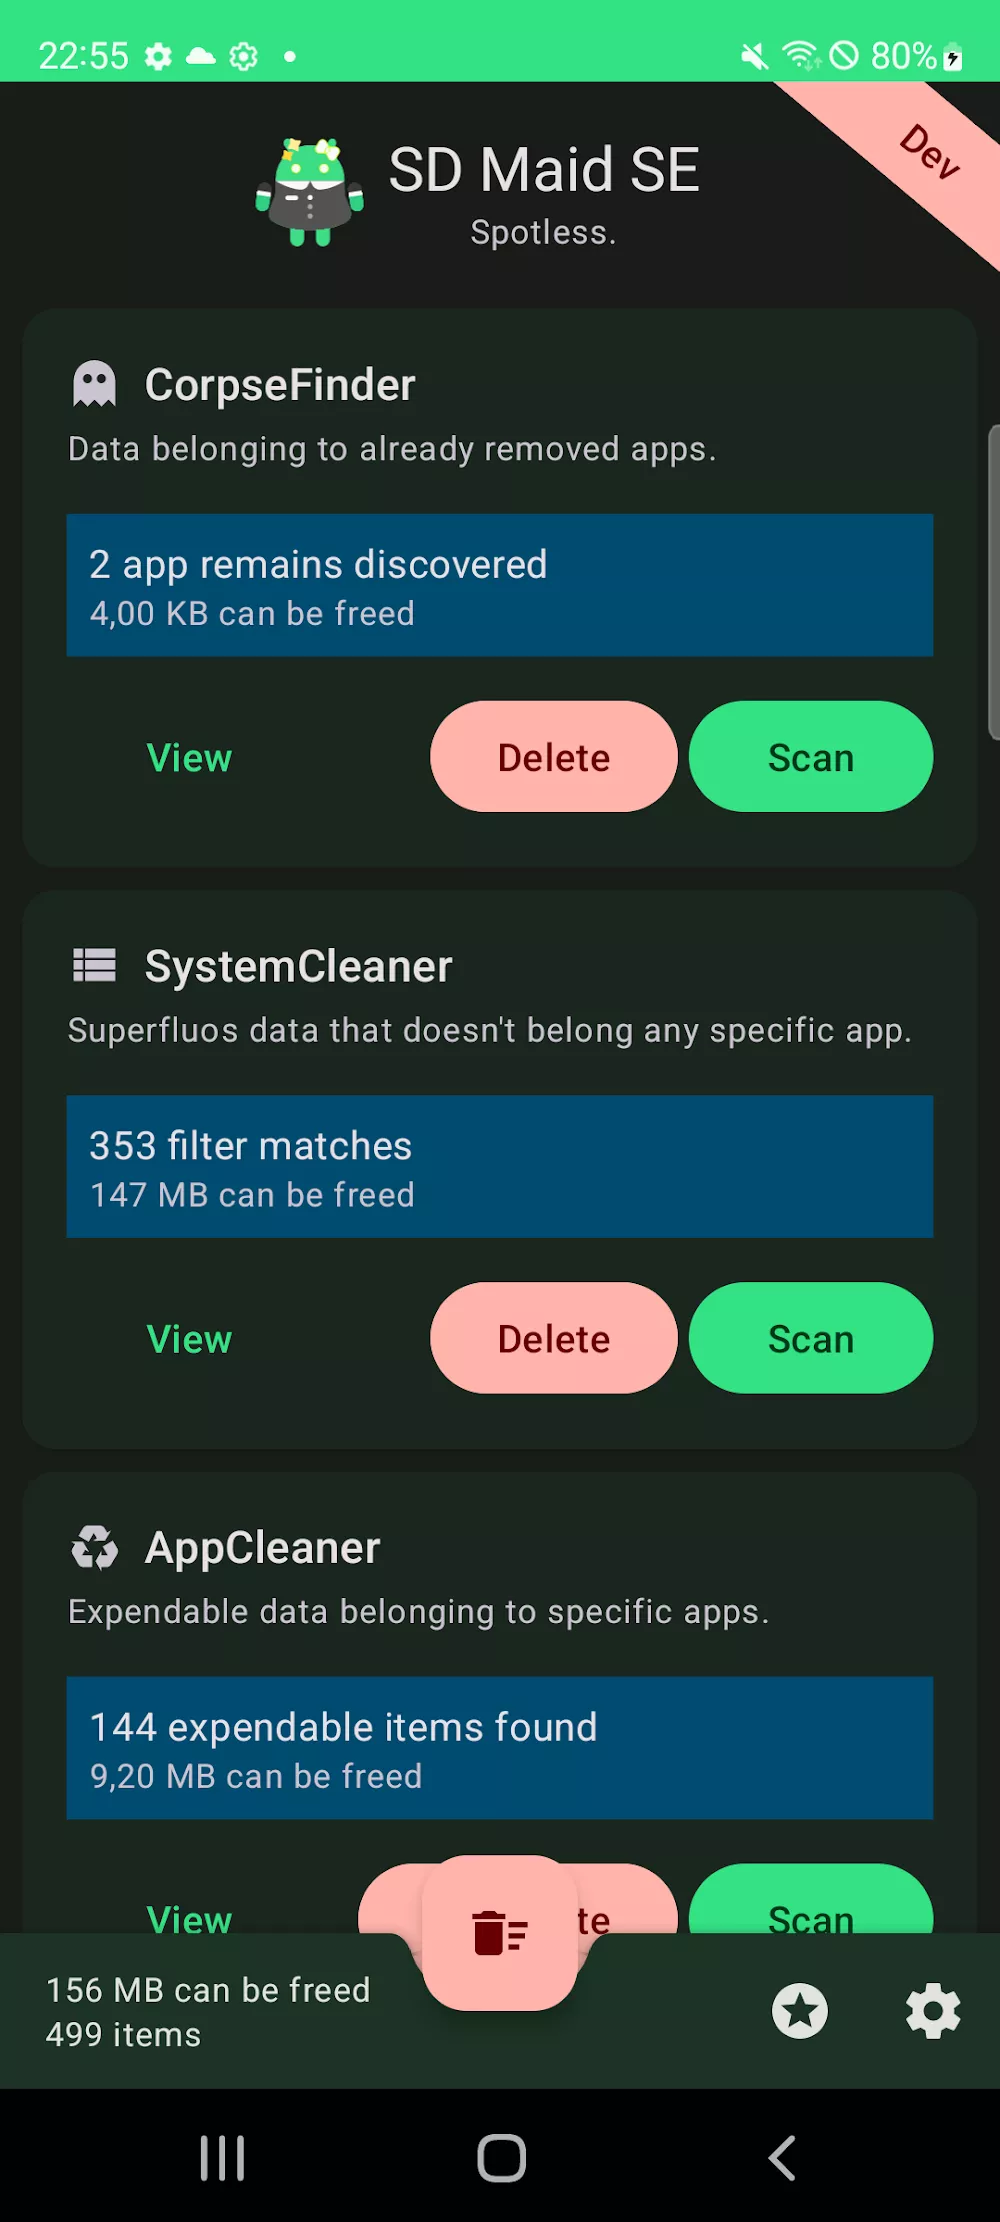 SD Maid 2/SE – System Cleaner